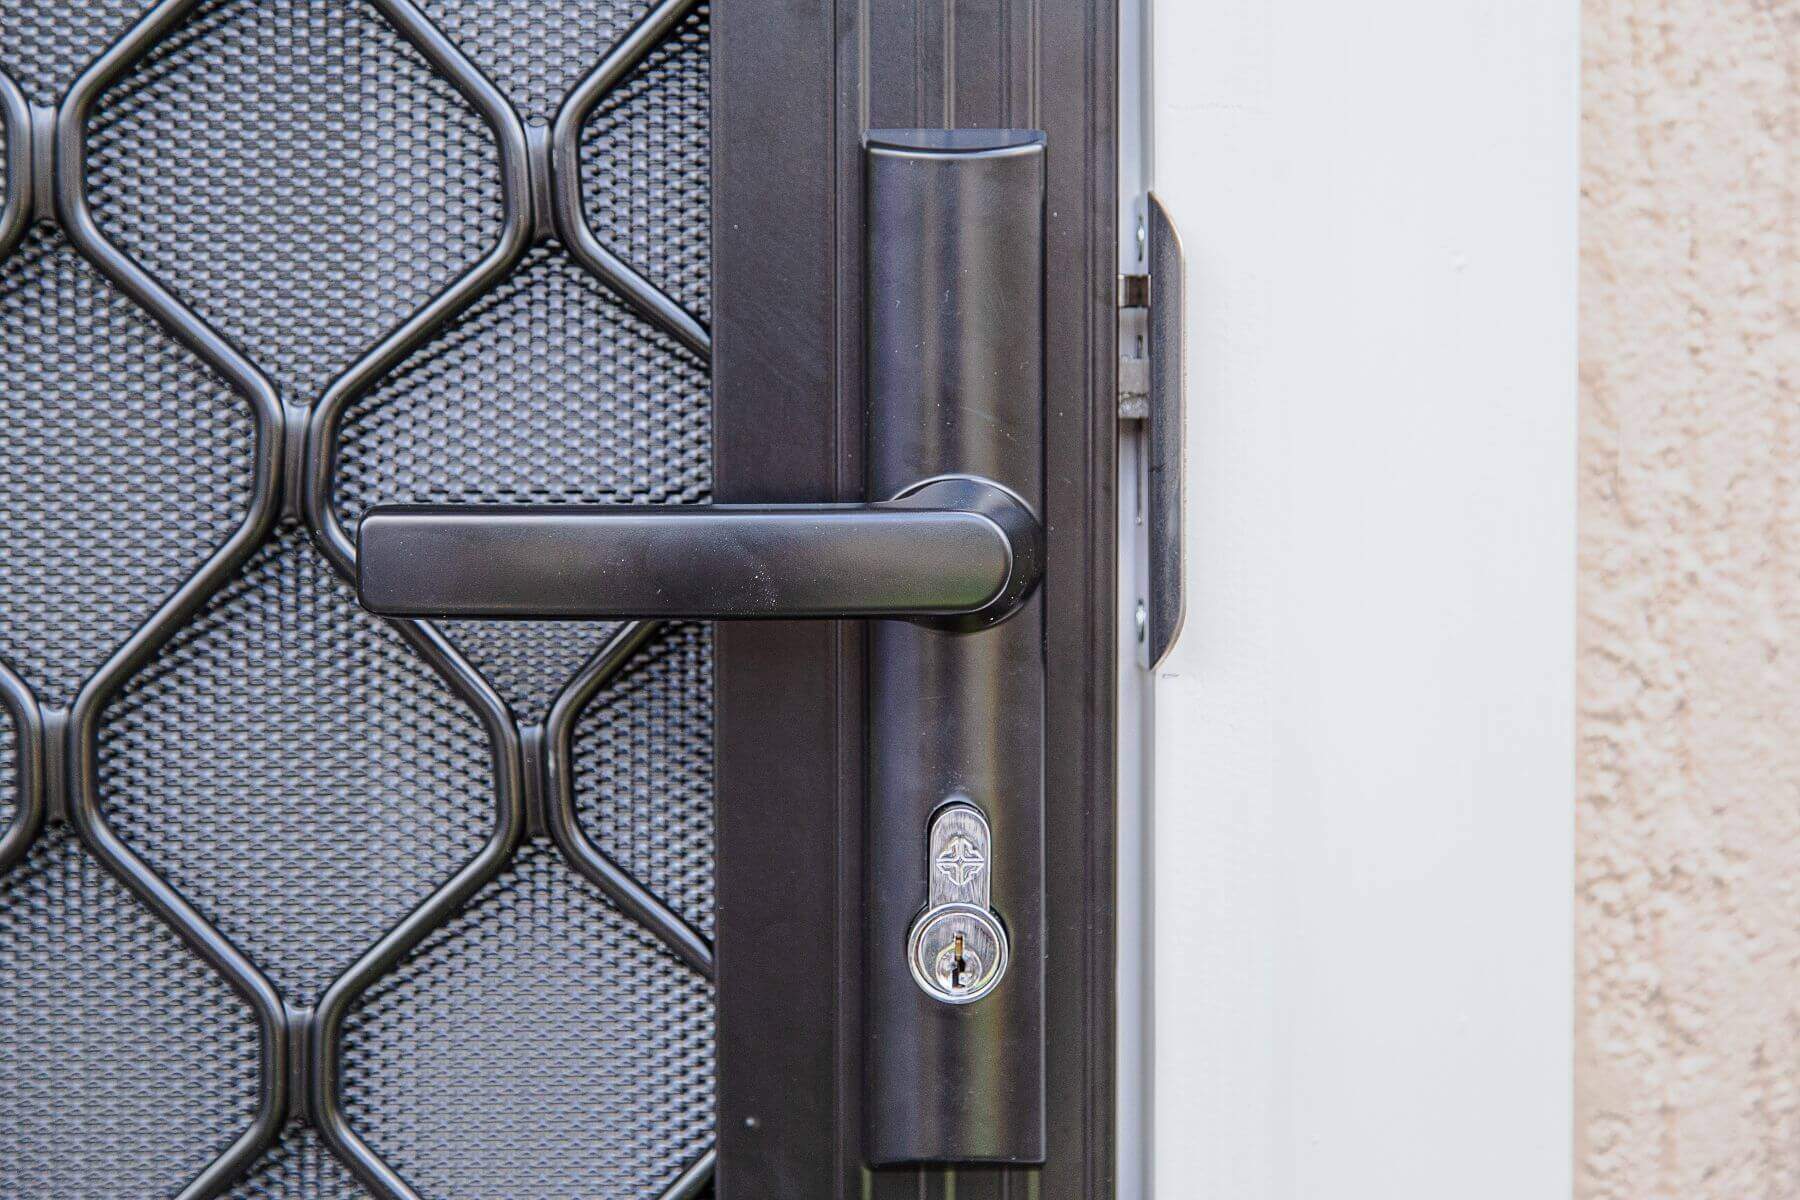 Doors Plus-External-Entrance-Nubreeze-Safety screen door-with grill design on it-in black finish-locking mechanism